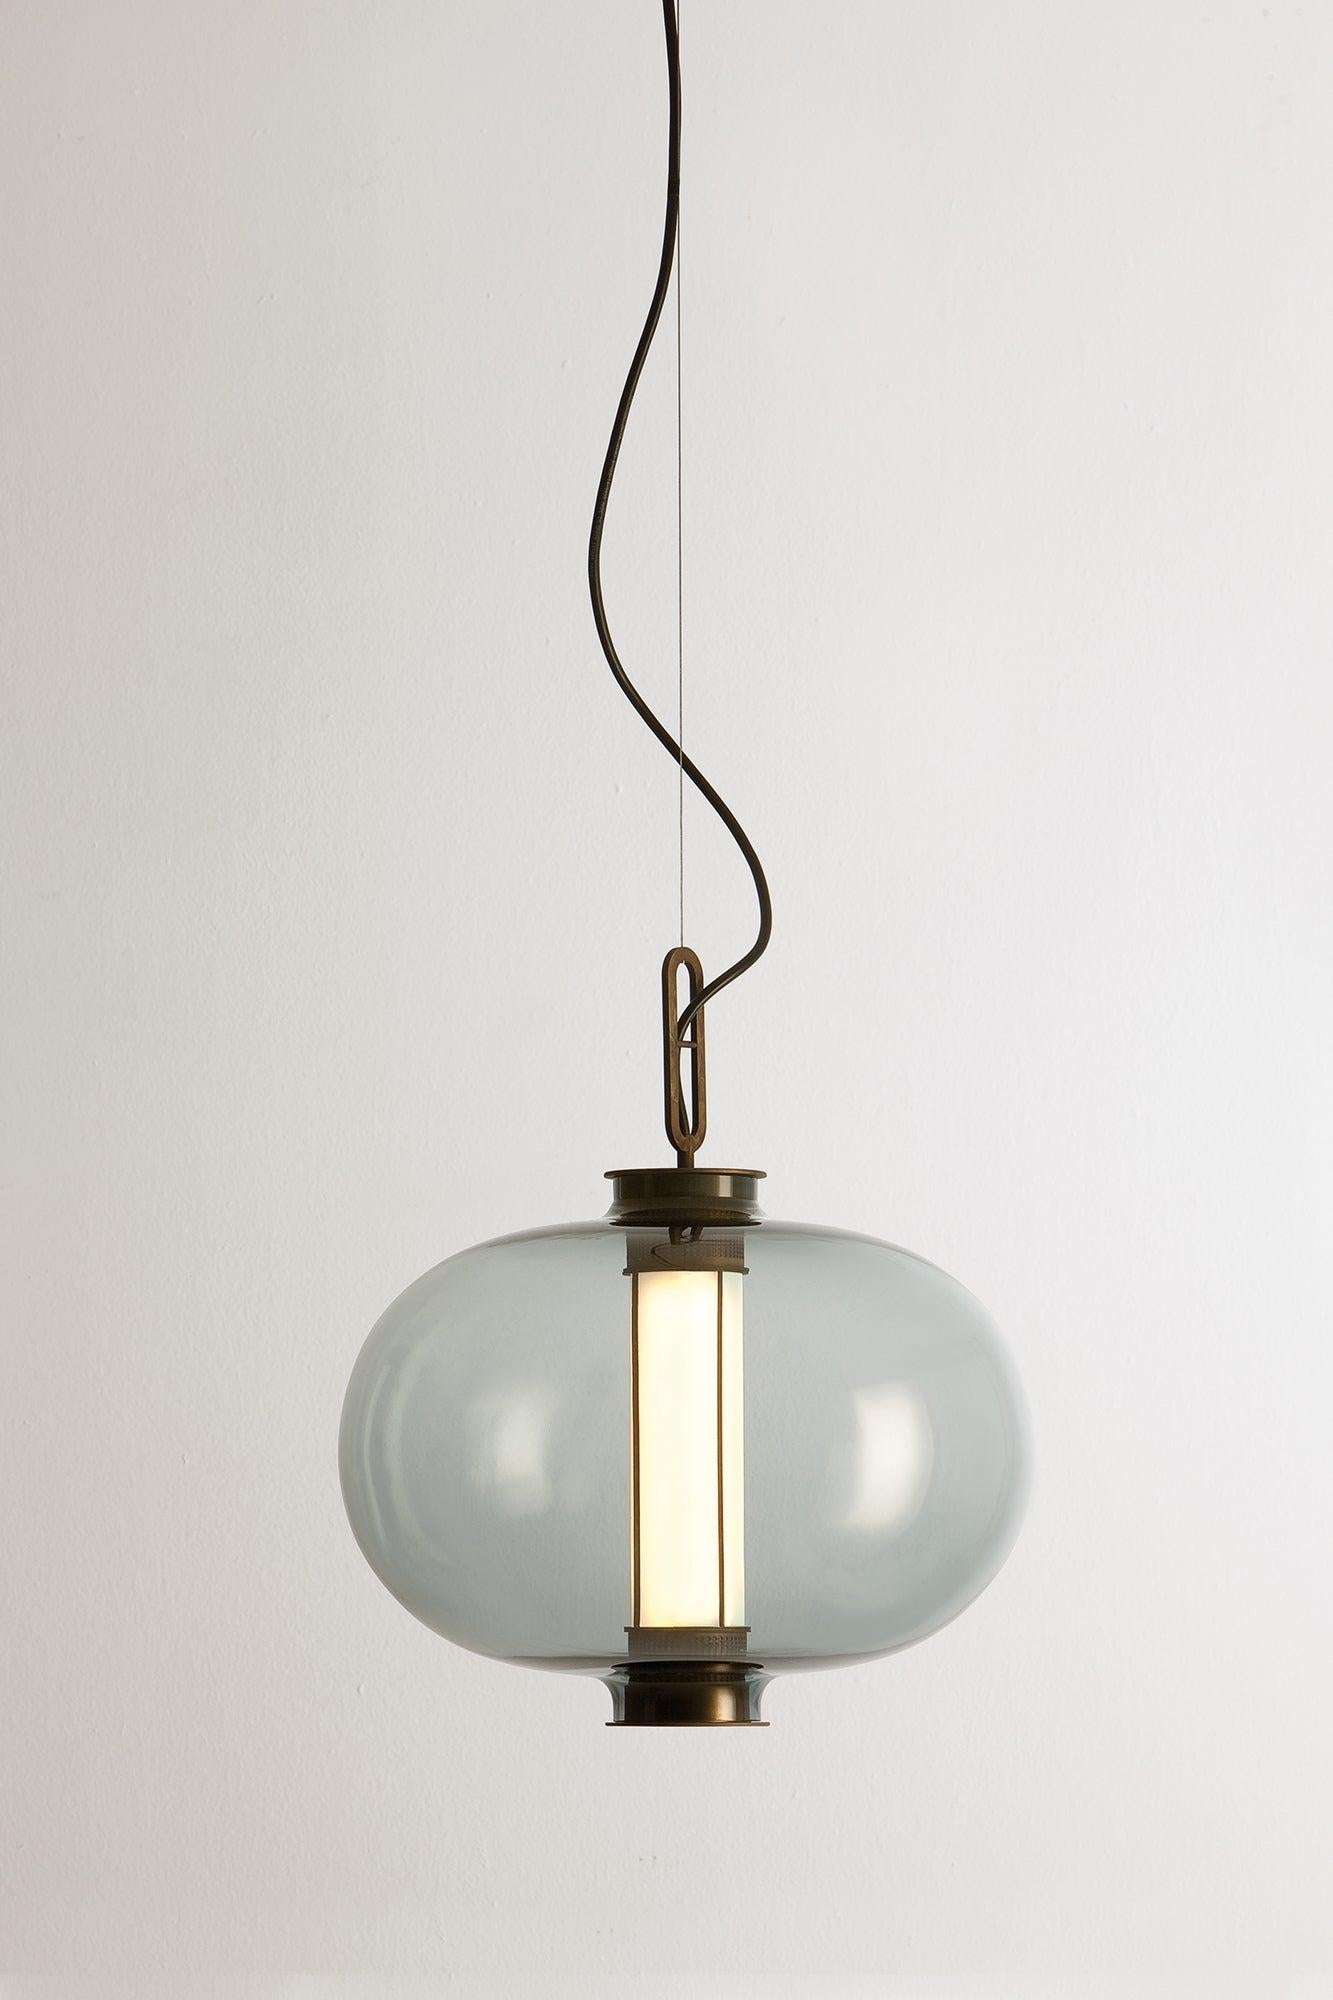 BAI T MA MA 

Suspension lamp, model BAI T MA MA, designed by Neri & Hu in 2014. 
Manufactured by Parachilna. 

This collection is inspired by traditional Chinese lanterns. This version however, is a sophisticated one. Made of an aged bronze